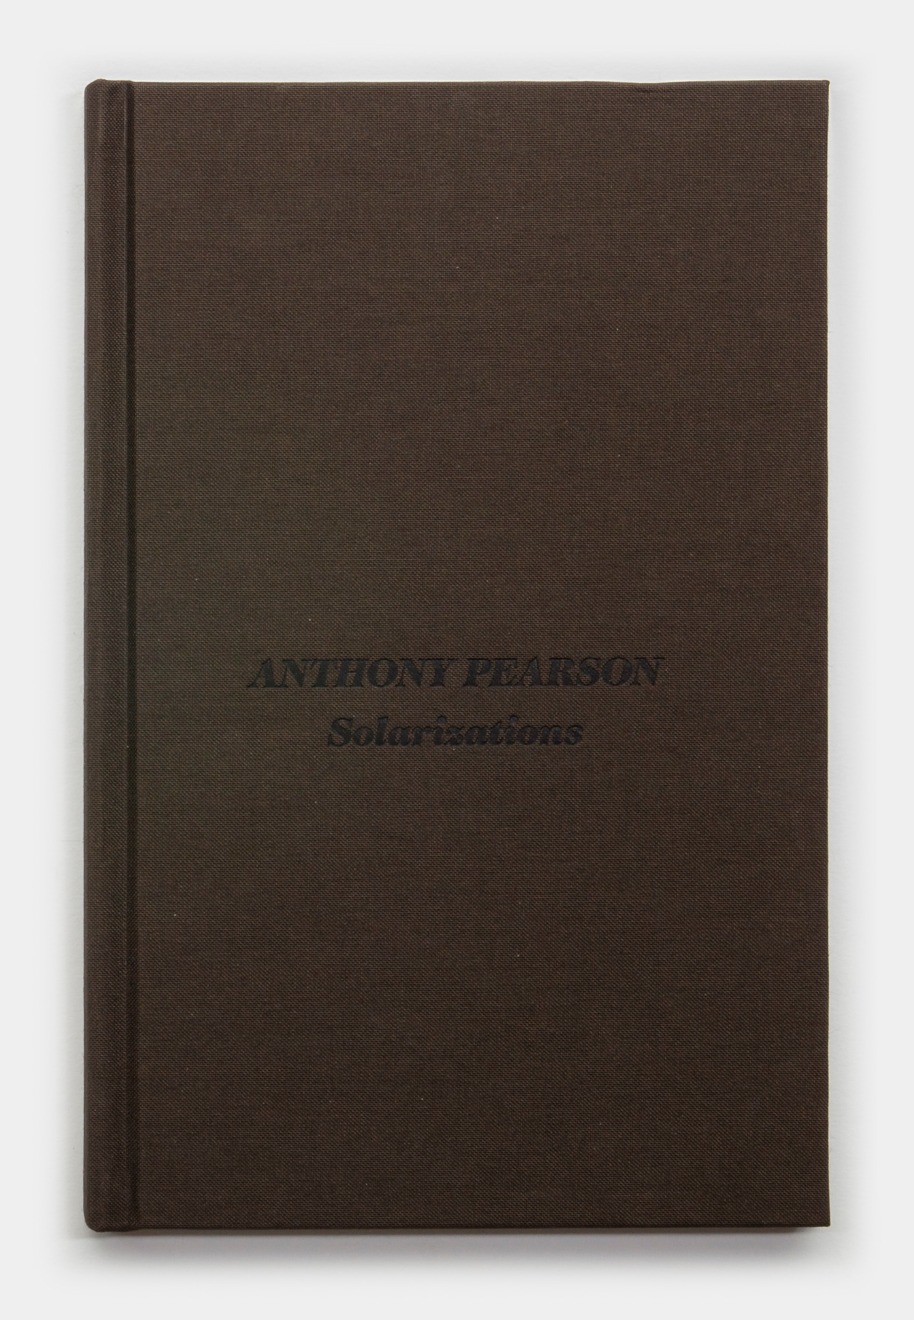 Anthony Pearson